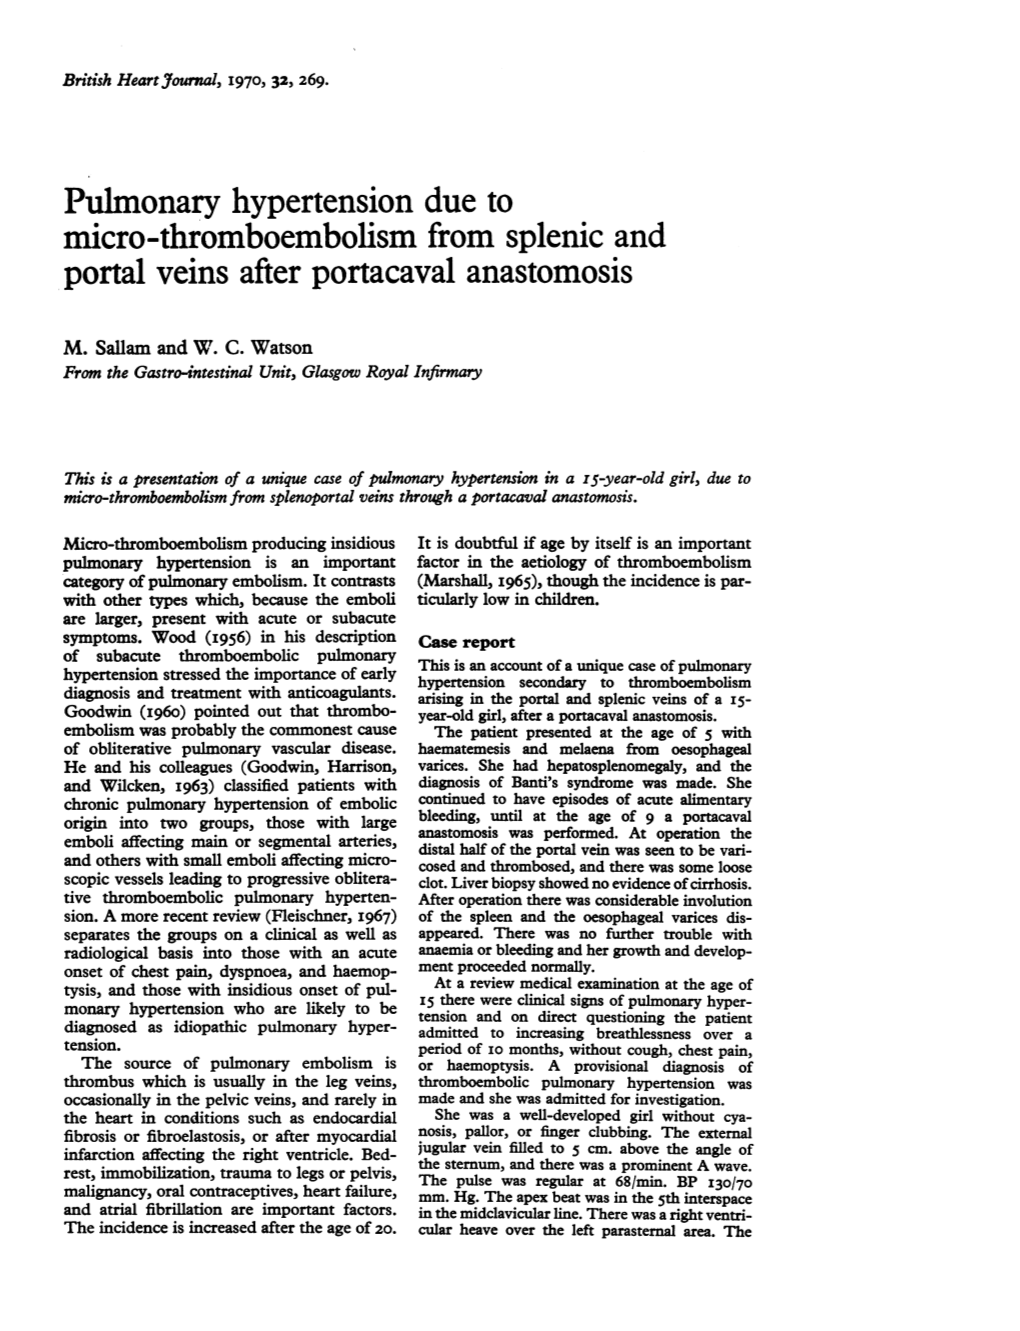 Pulmonary Hypertension Due to Micro-Thromboembolism from Splenic and Portal Veins After Portacaval Anastomosis